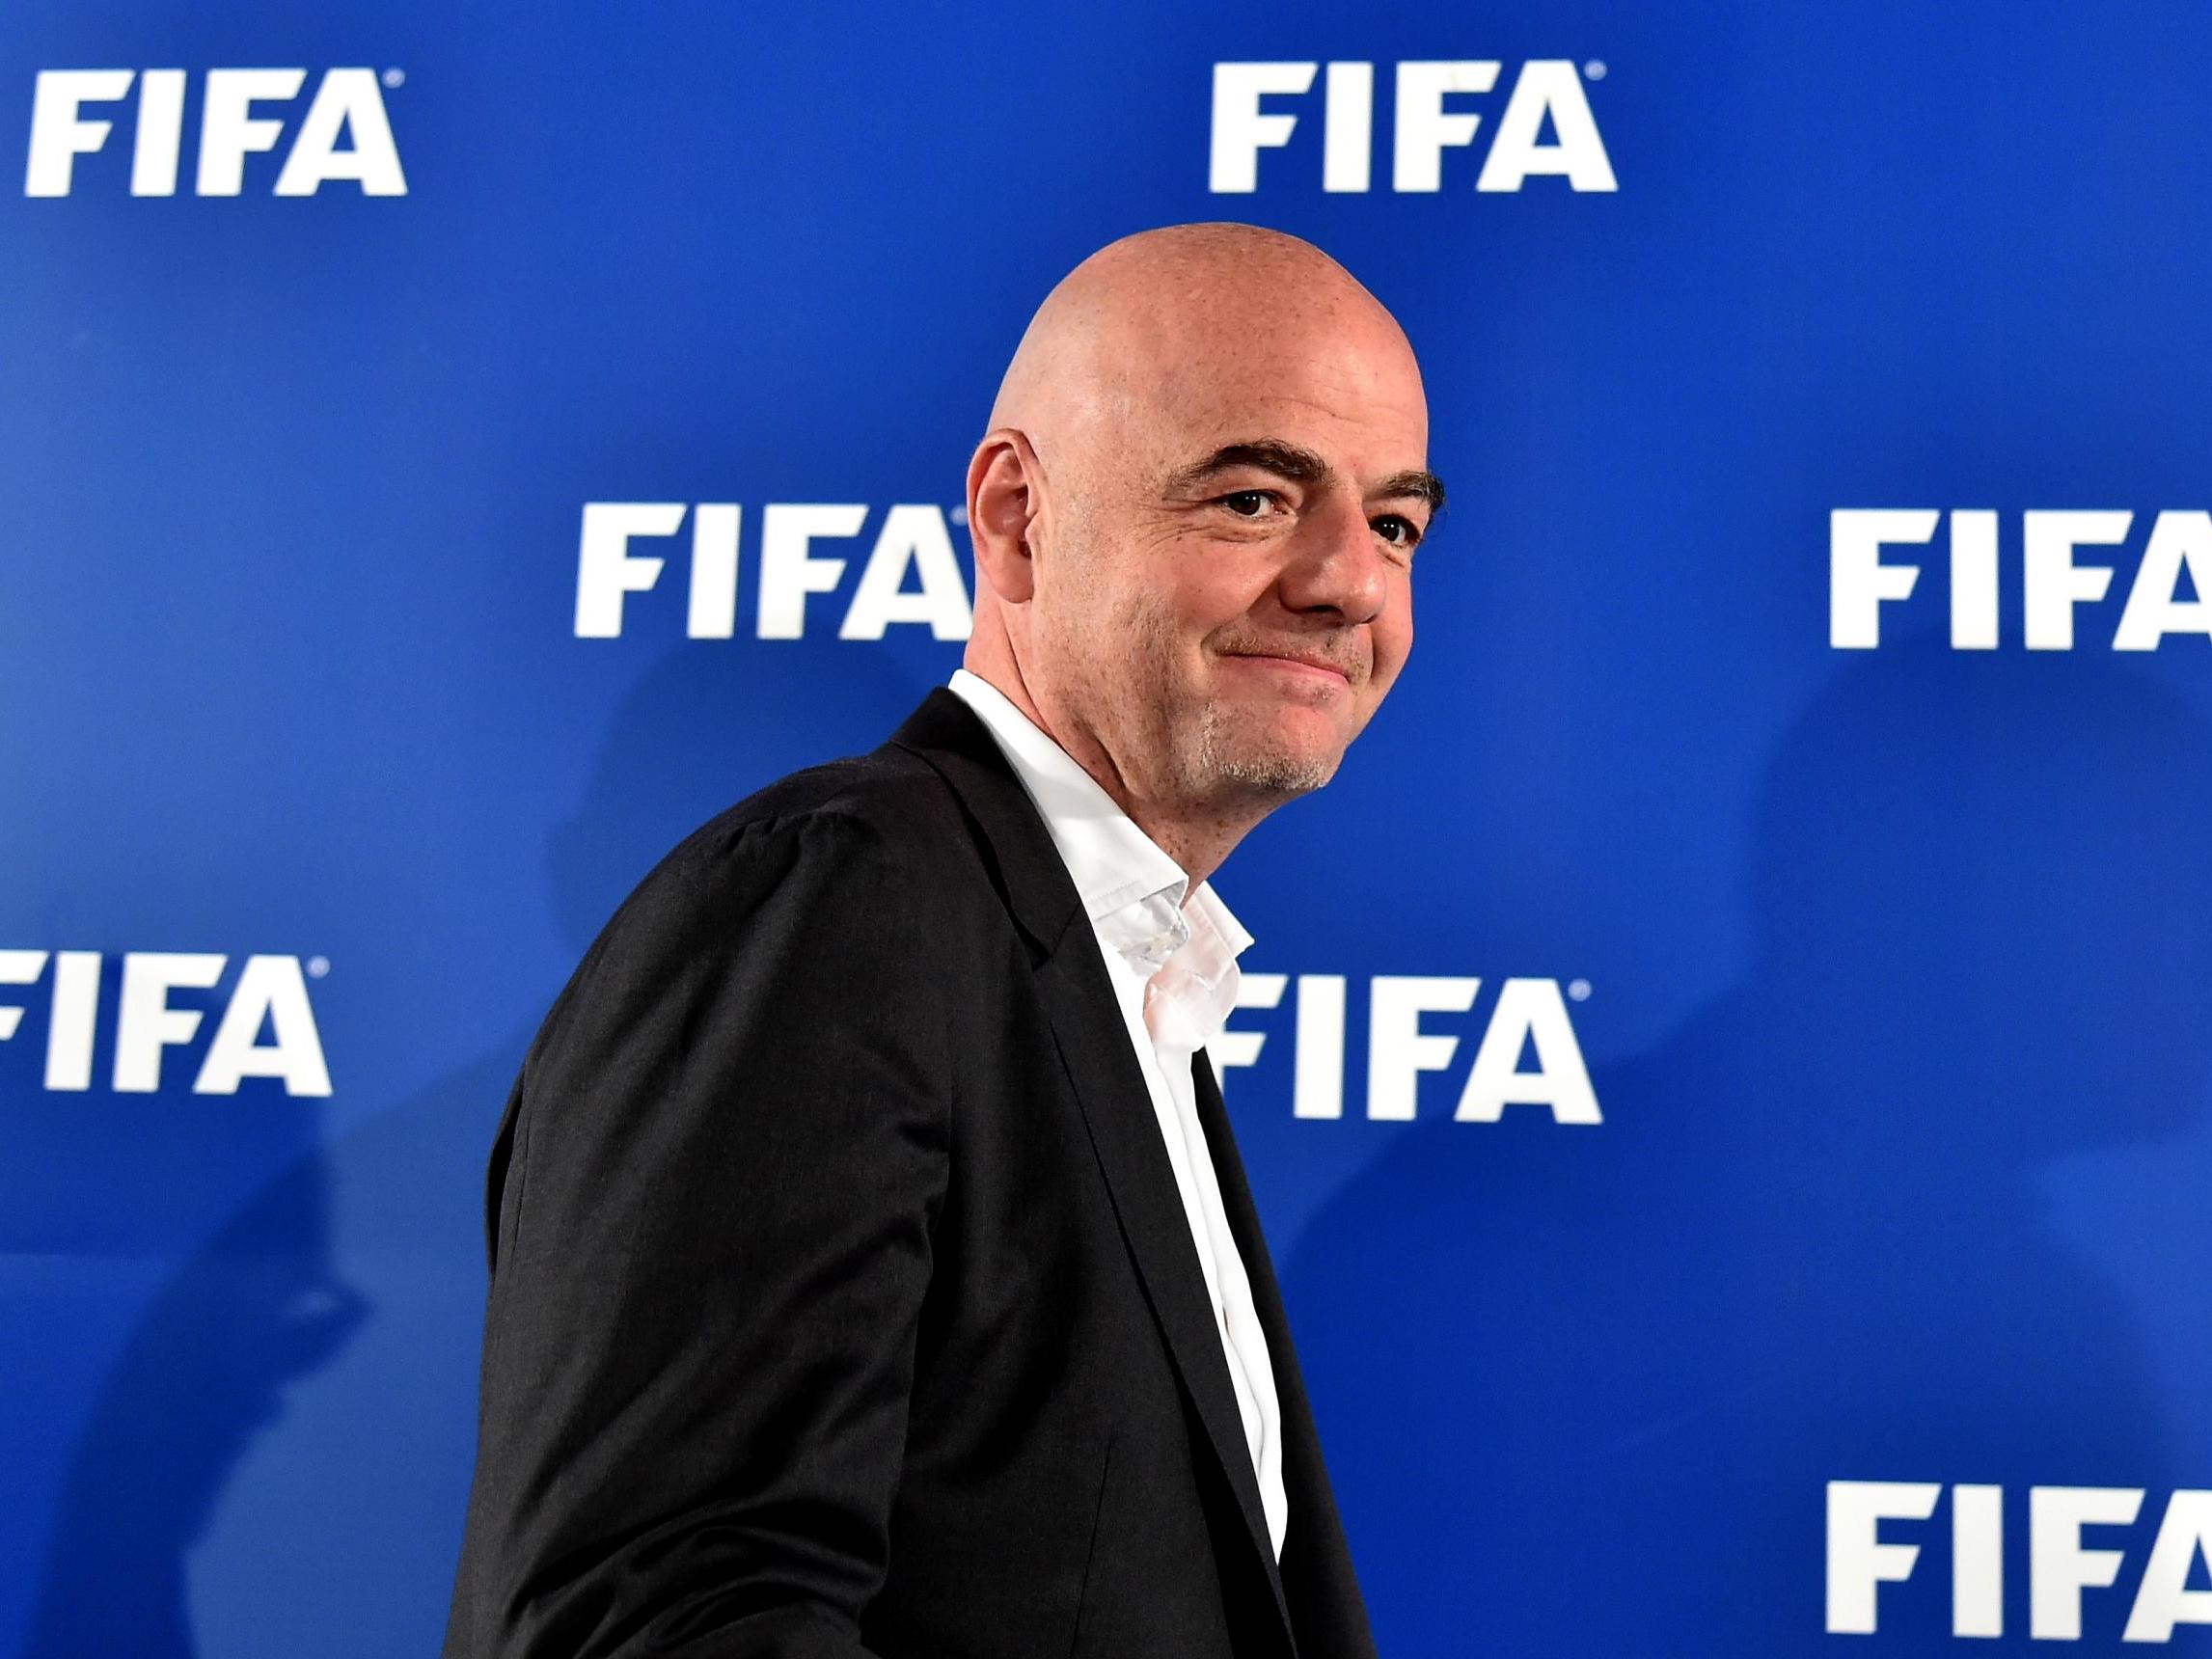 Infantino replaced the disgraced Sepp Blatter as Fifa president in 2016